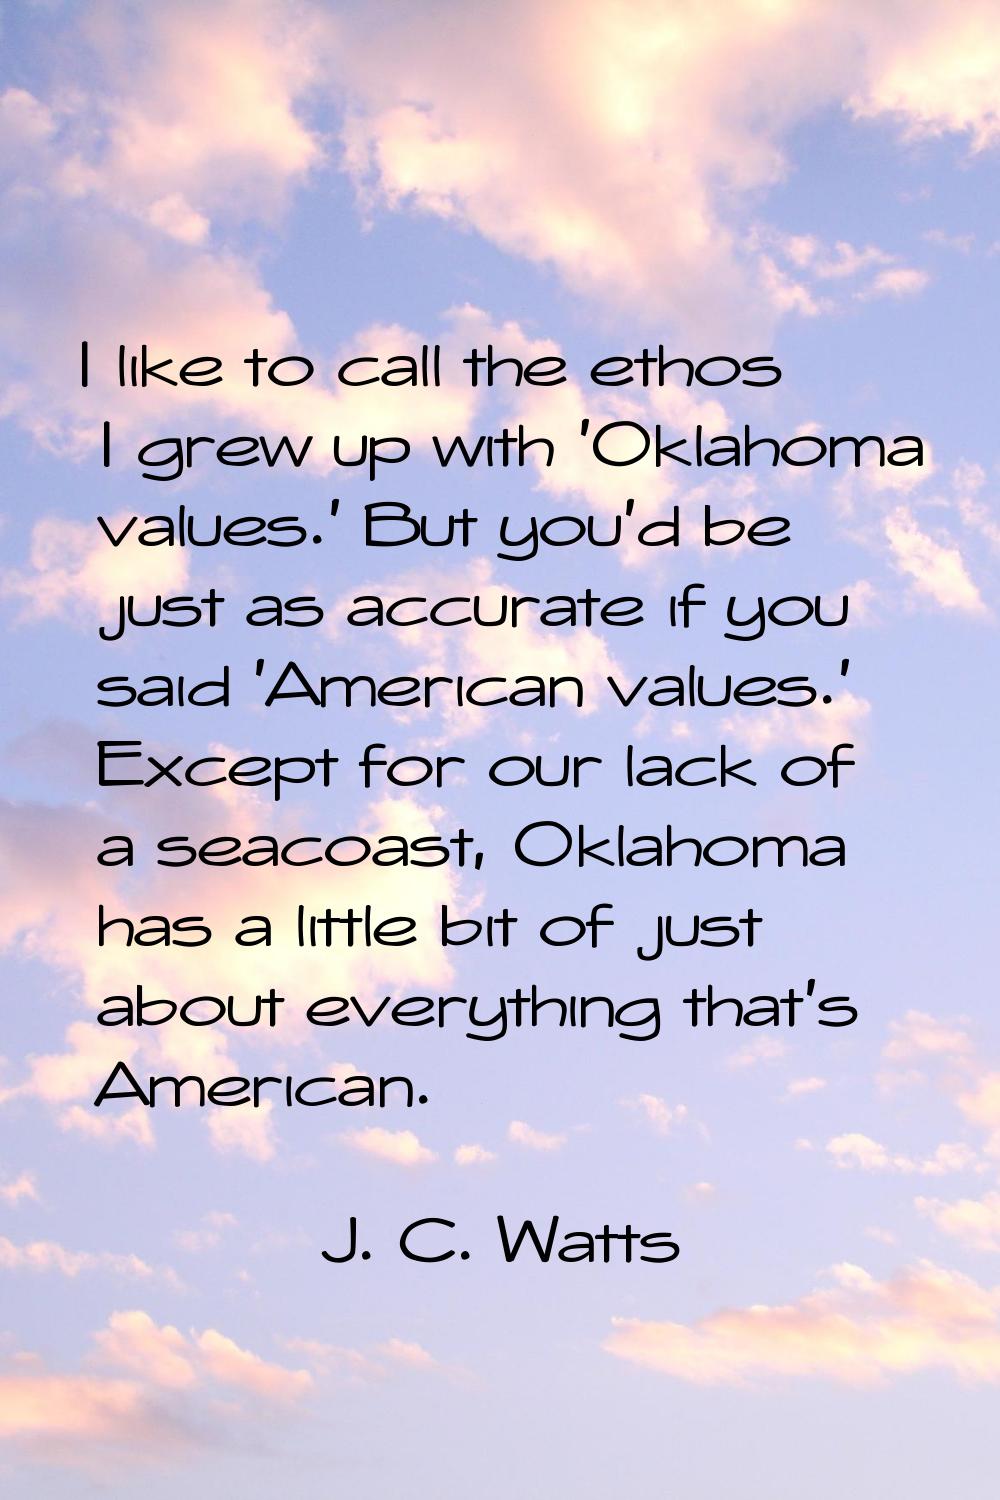 I like to call the ethos I grew up with 'Oklahoma values.' But you'd be just as accurate if you sai